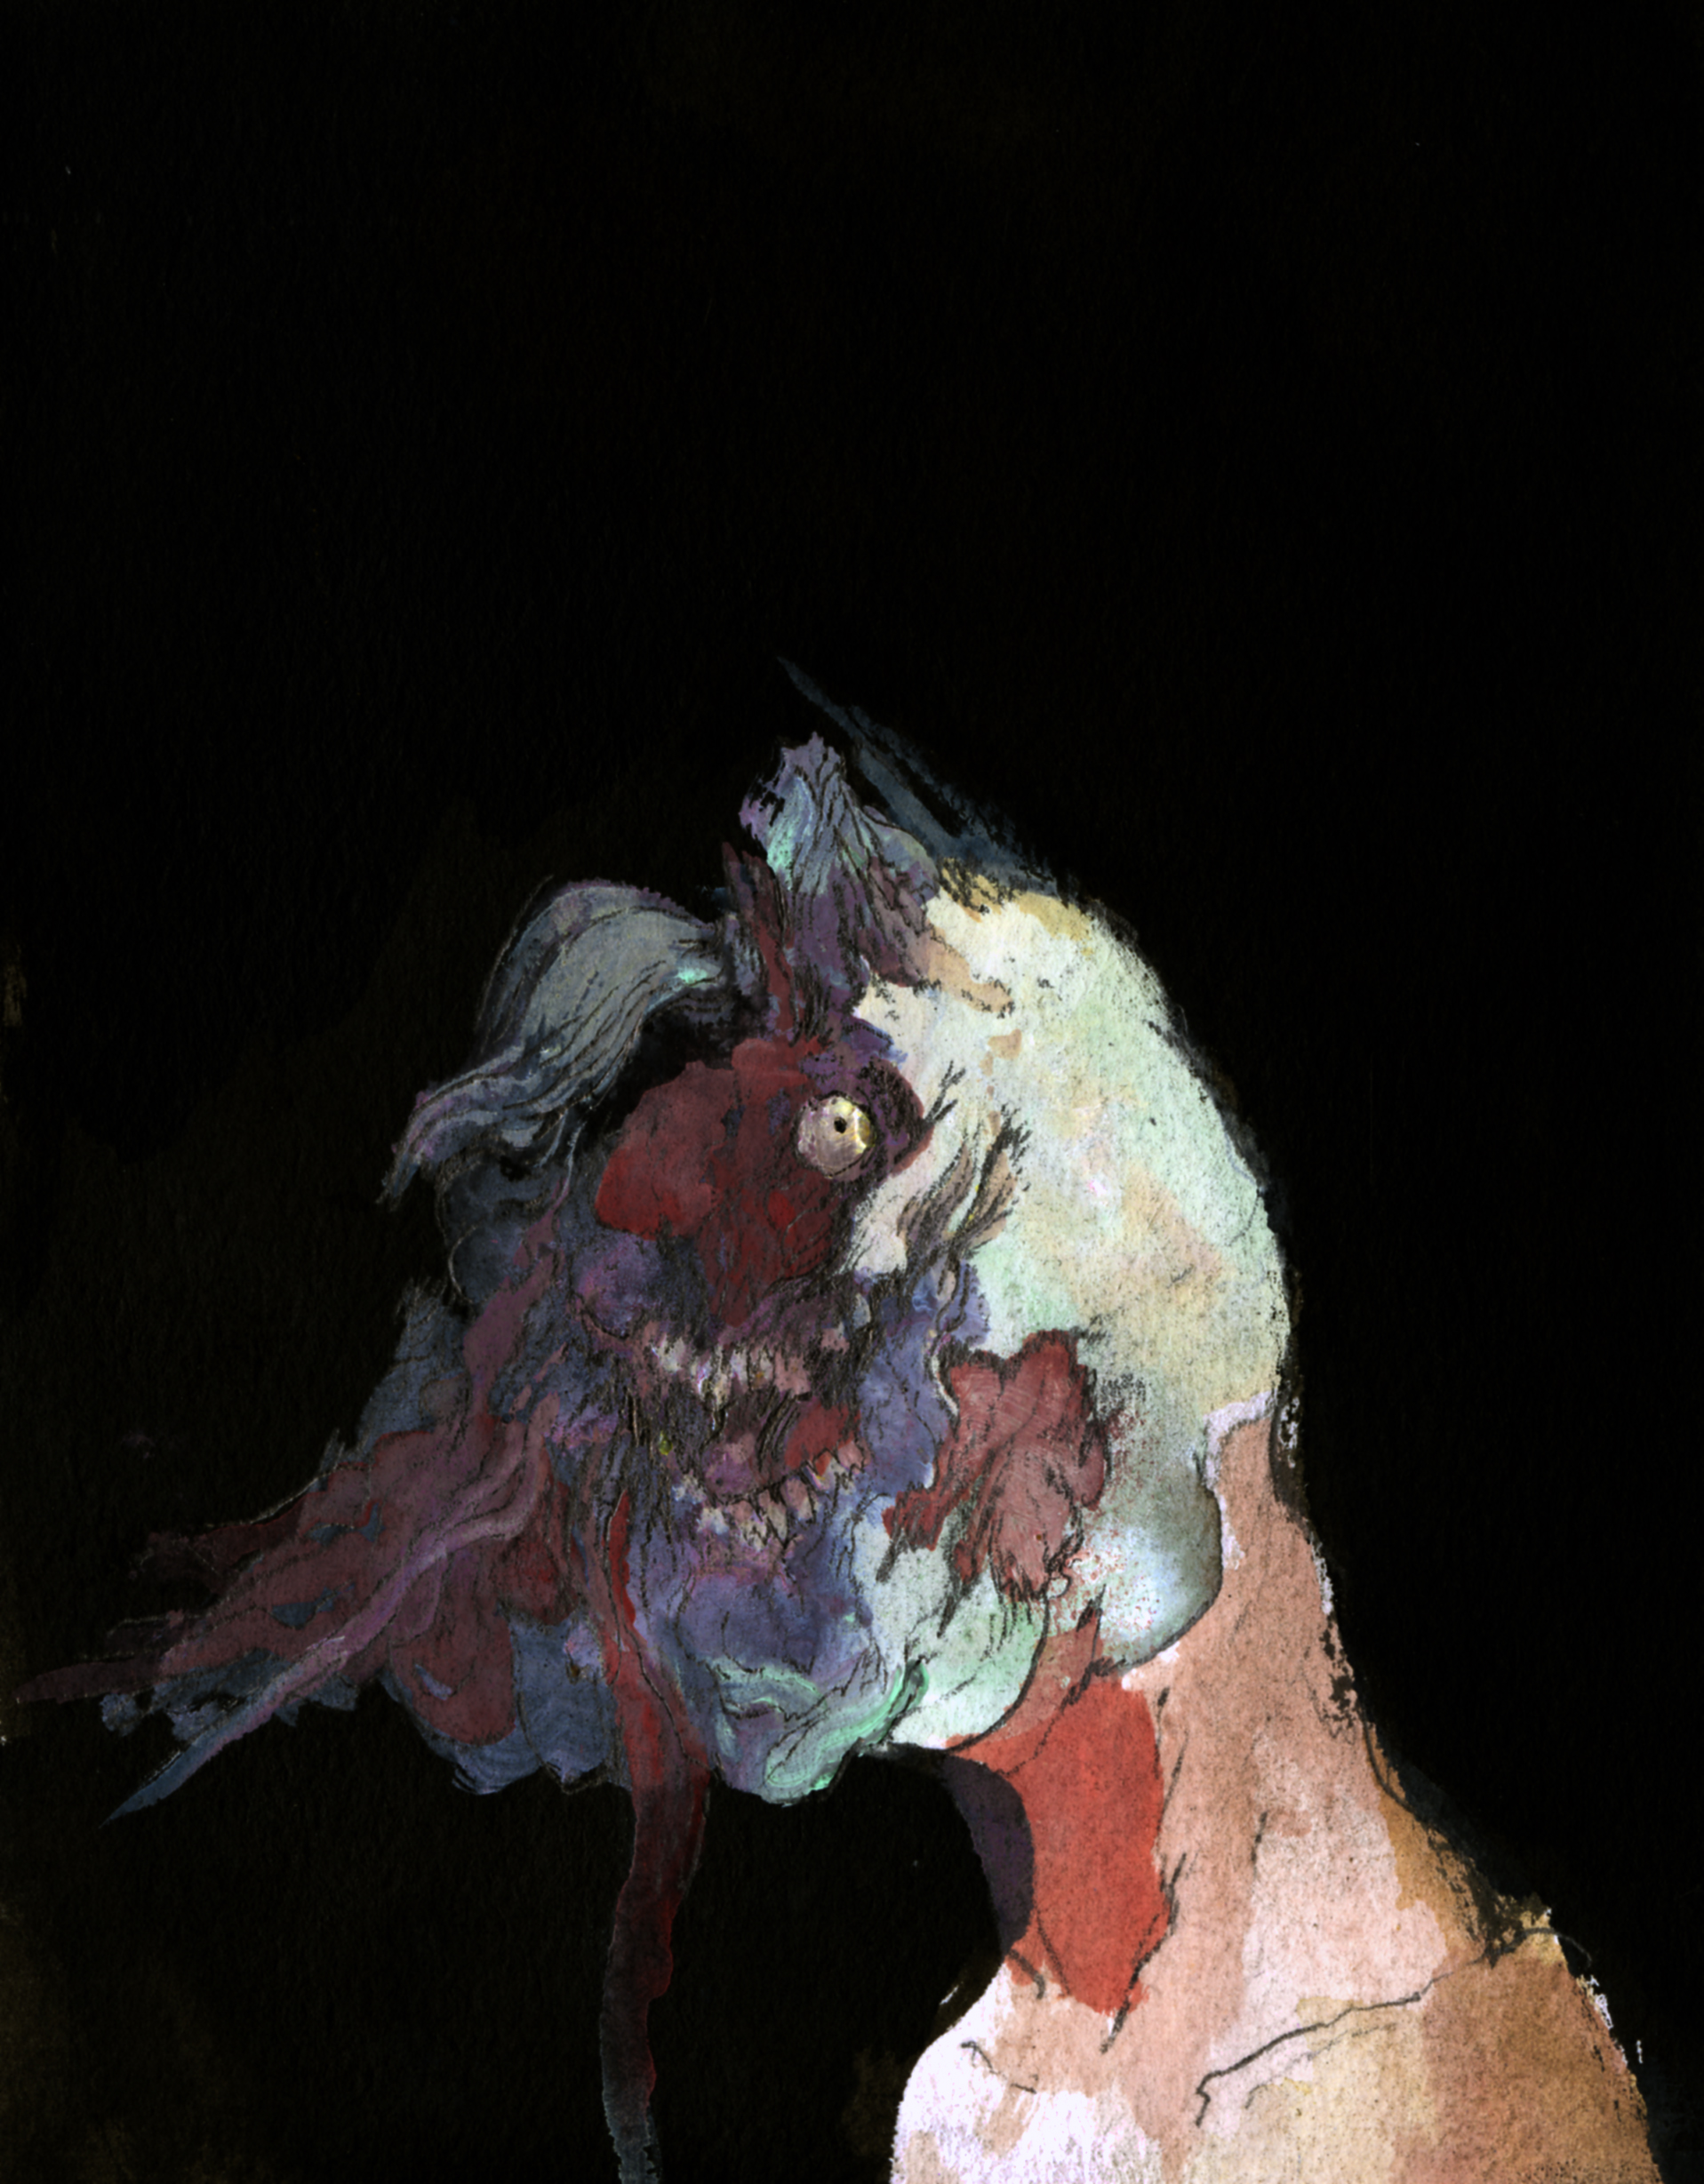 study for a caved in skull.